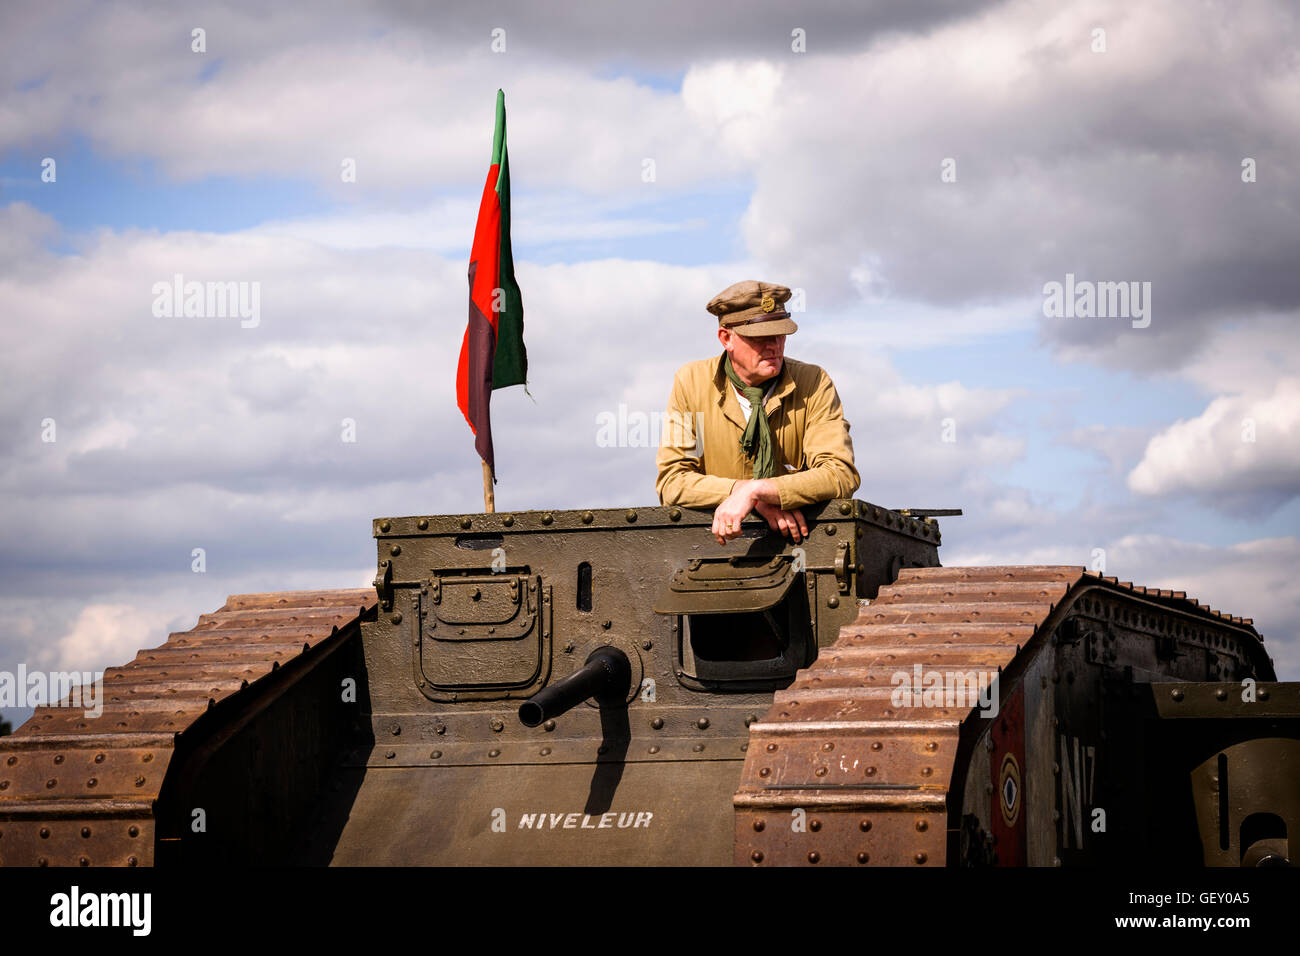 Posing in a N17 Niveleur WW1 Mk lV Tank replica at The 6th Annual Combined Ops Show. Stock Photo